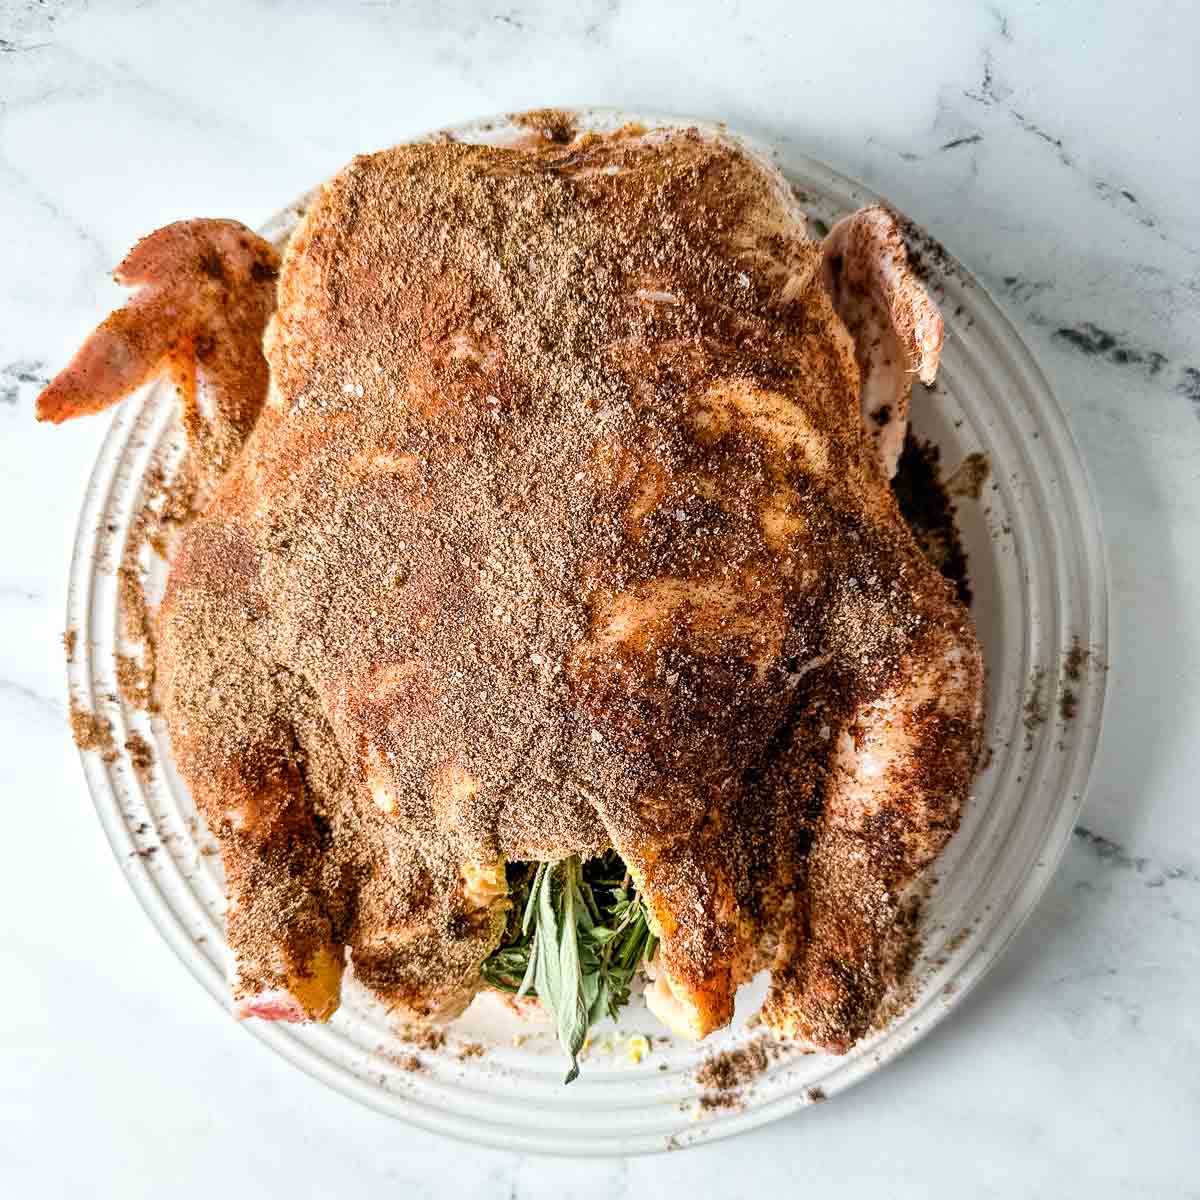 A whole chicken is dusted with spices on a white plate.